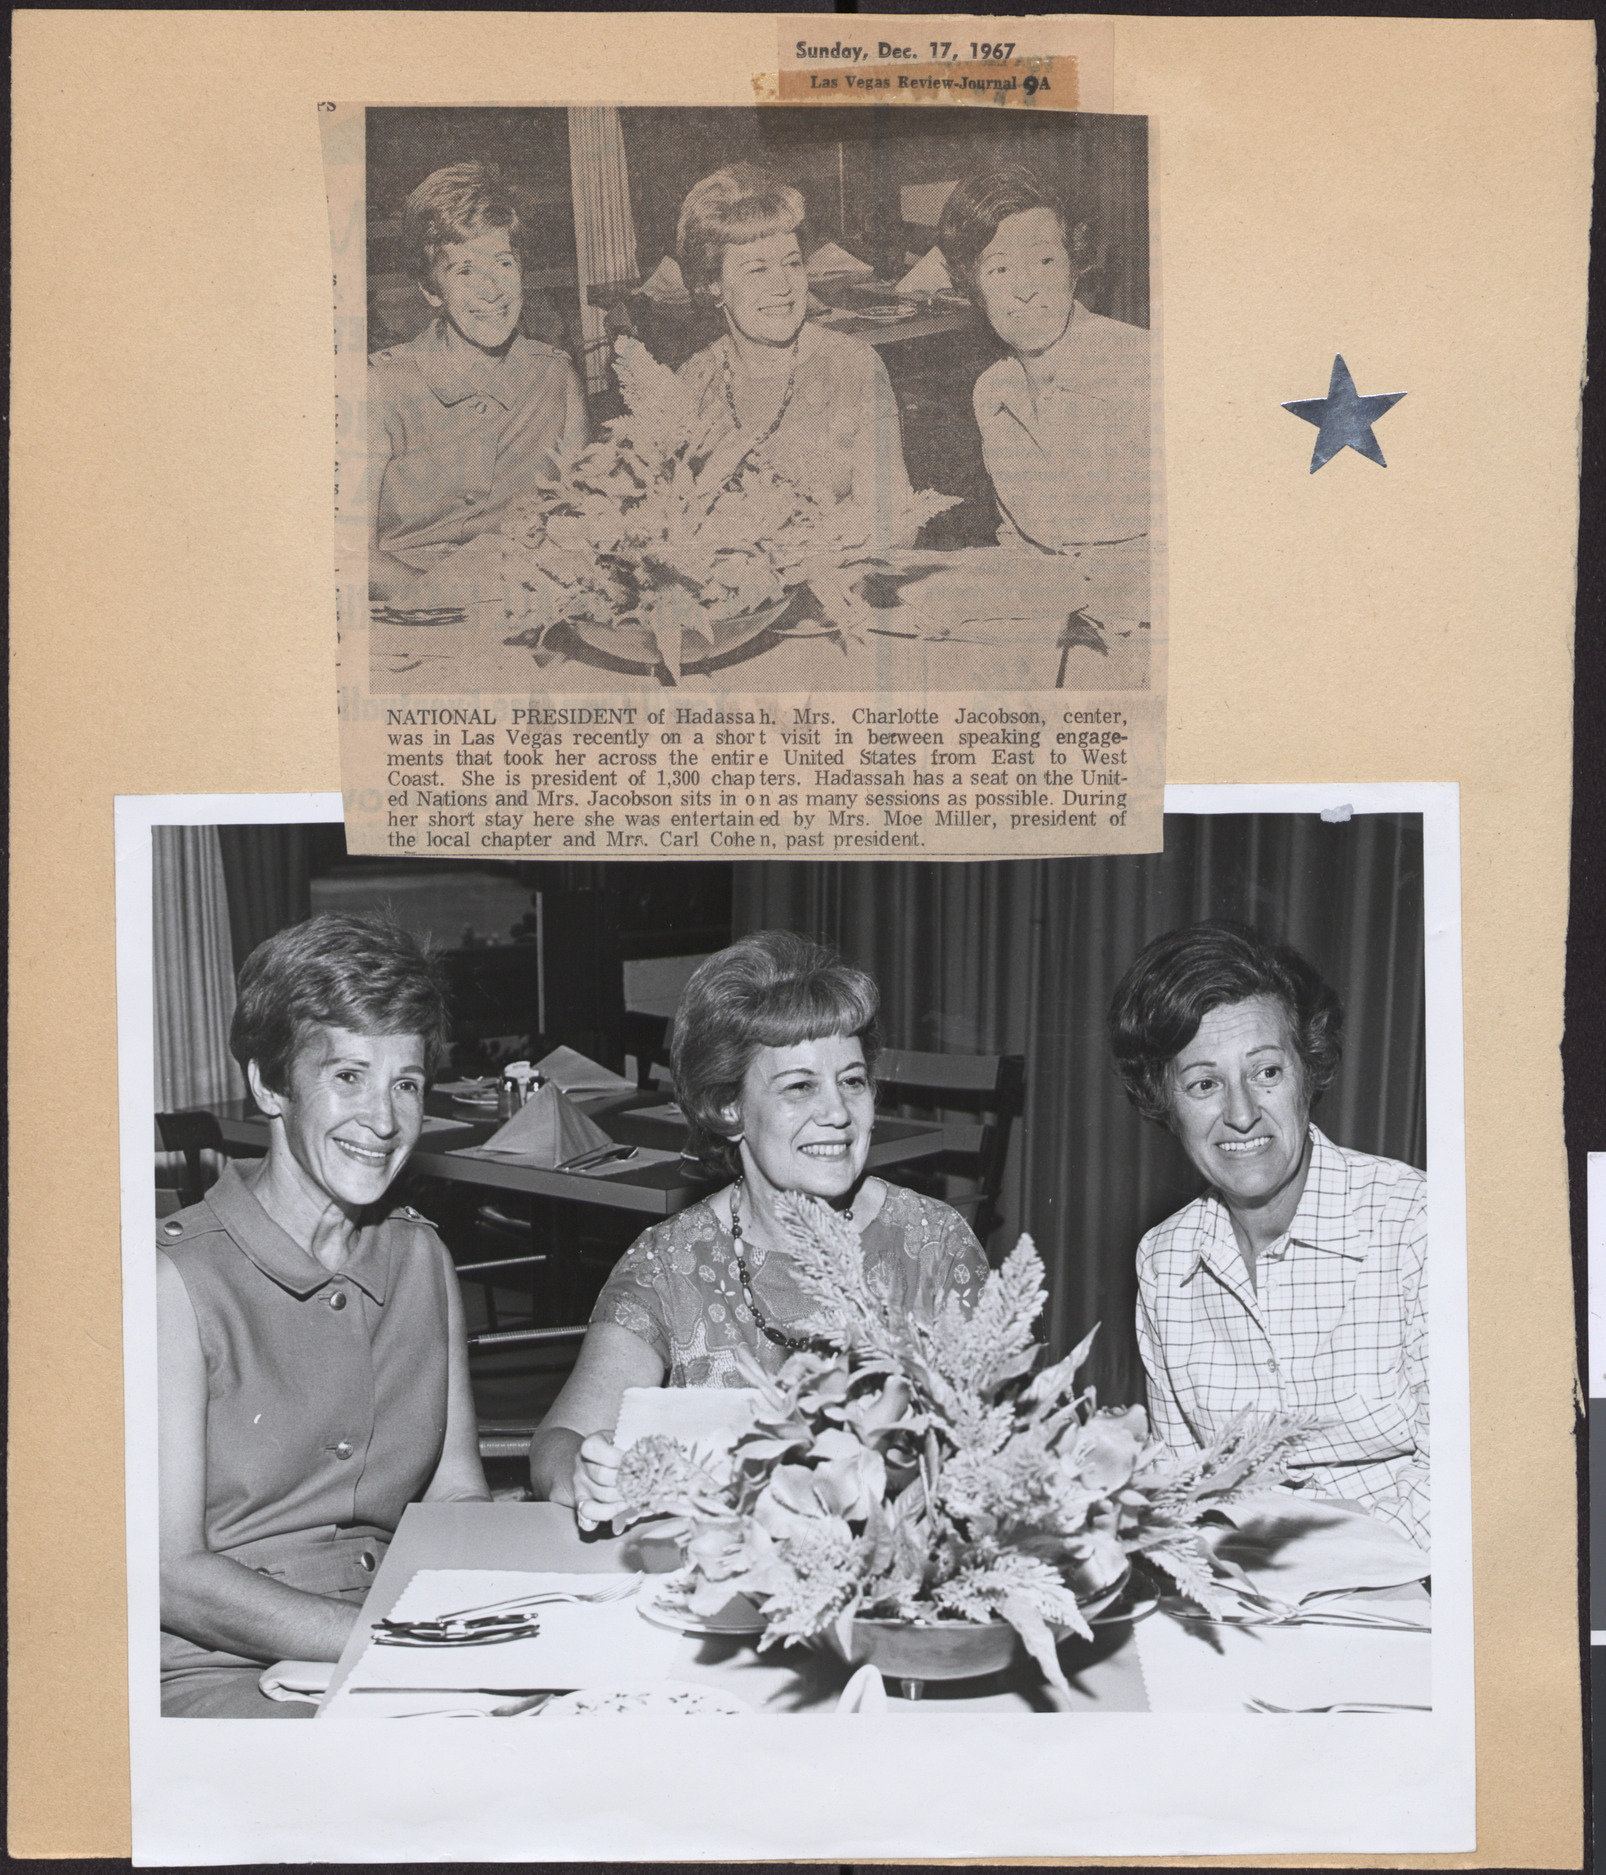 Newspaper clipping, National President [of Hadassah] with Fran Cohen and Lillian Miller, Las Vegas Review-Journal, December 17, 1967, and Photograph of Fran Cohen, Charlotte Jacobsen and Lillian Miller